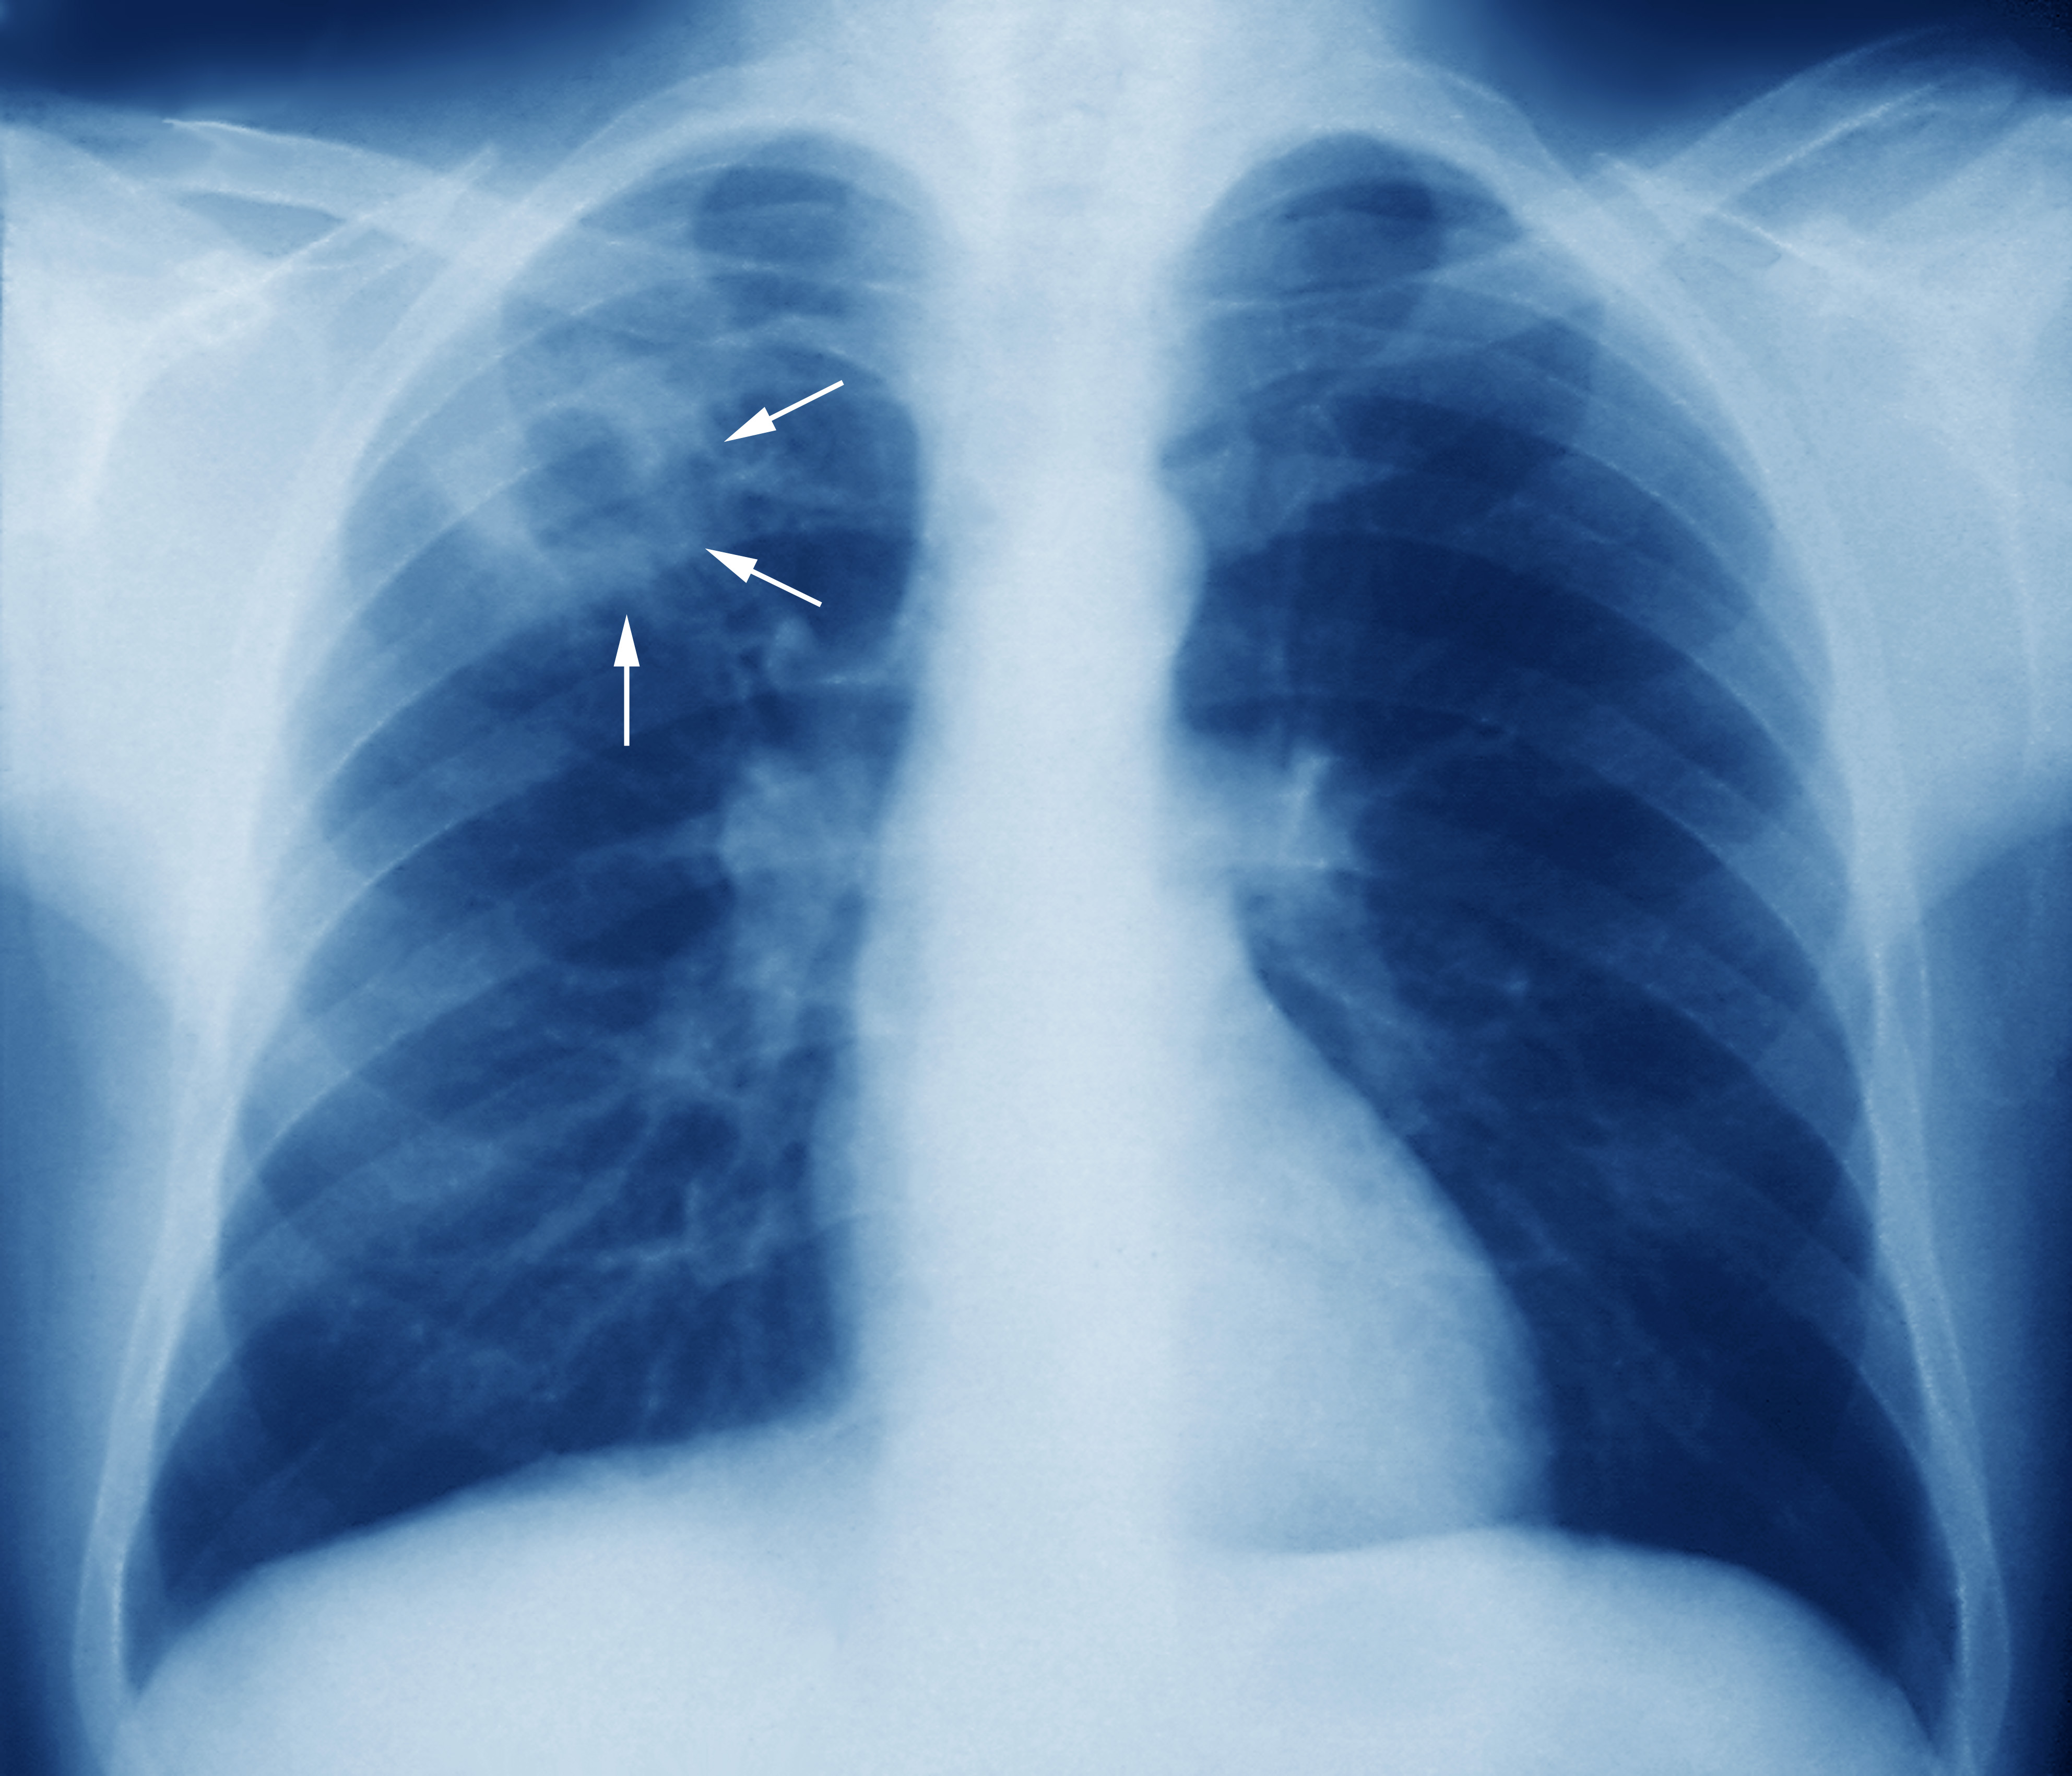 http://medthai.net/wp-content/uploads/2020/12/m2700245-tuberculosis-chest-x-ray-science-photo-library-high.jpg